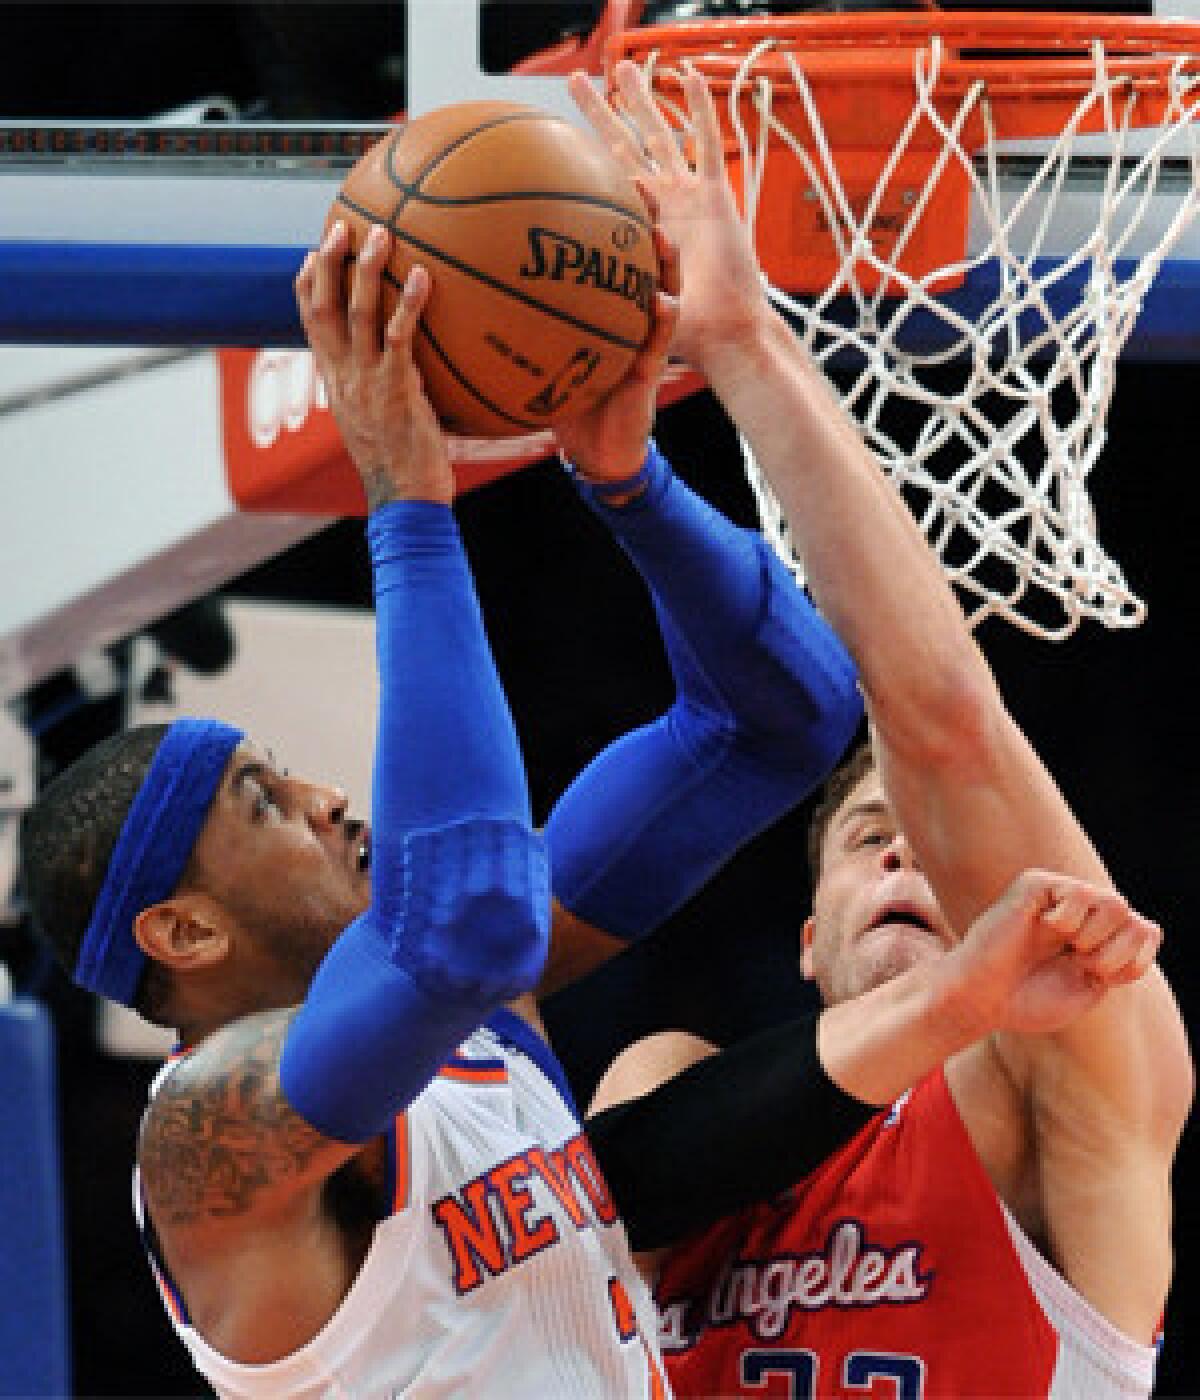 Blake Griffin, right, defends against New York's Carmelo Anthony during the Clippers' 102-88 victory over the Knicks in February.